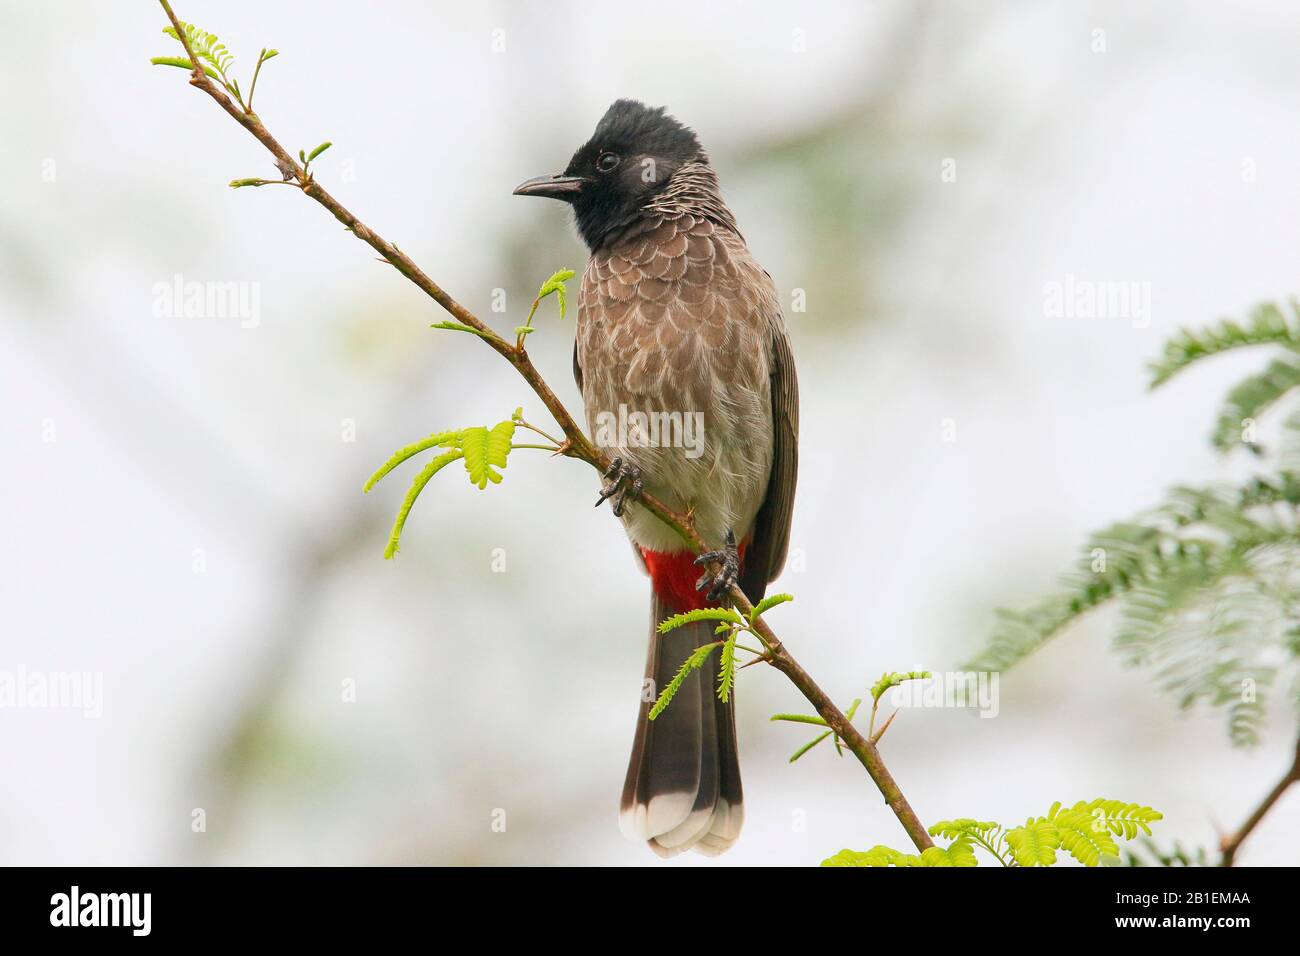 Red-vented Bulbul (Pycnonotus cafer) on a branch in a shrub, North West India Stock Photo